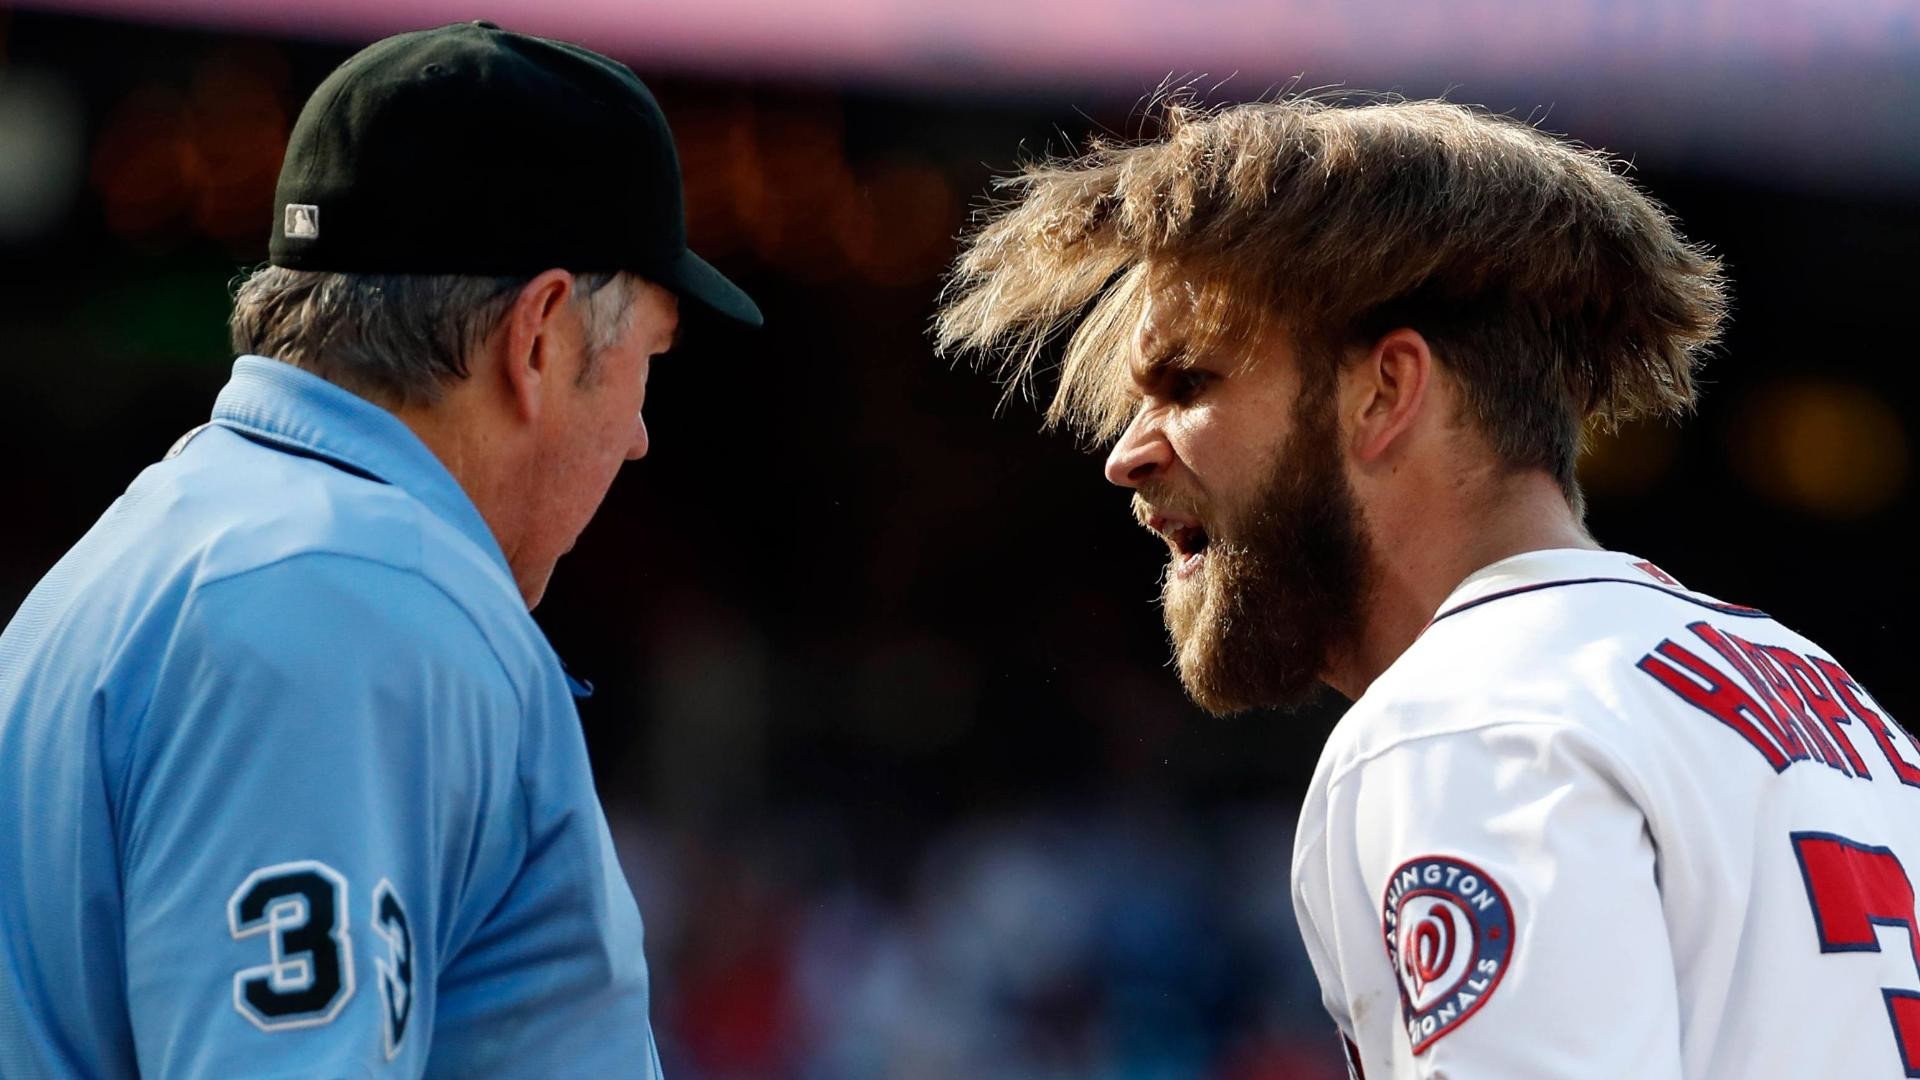 1920x1080 Bryce Harper ejected after arguing called third strike